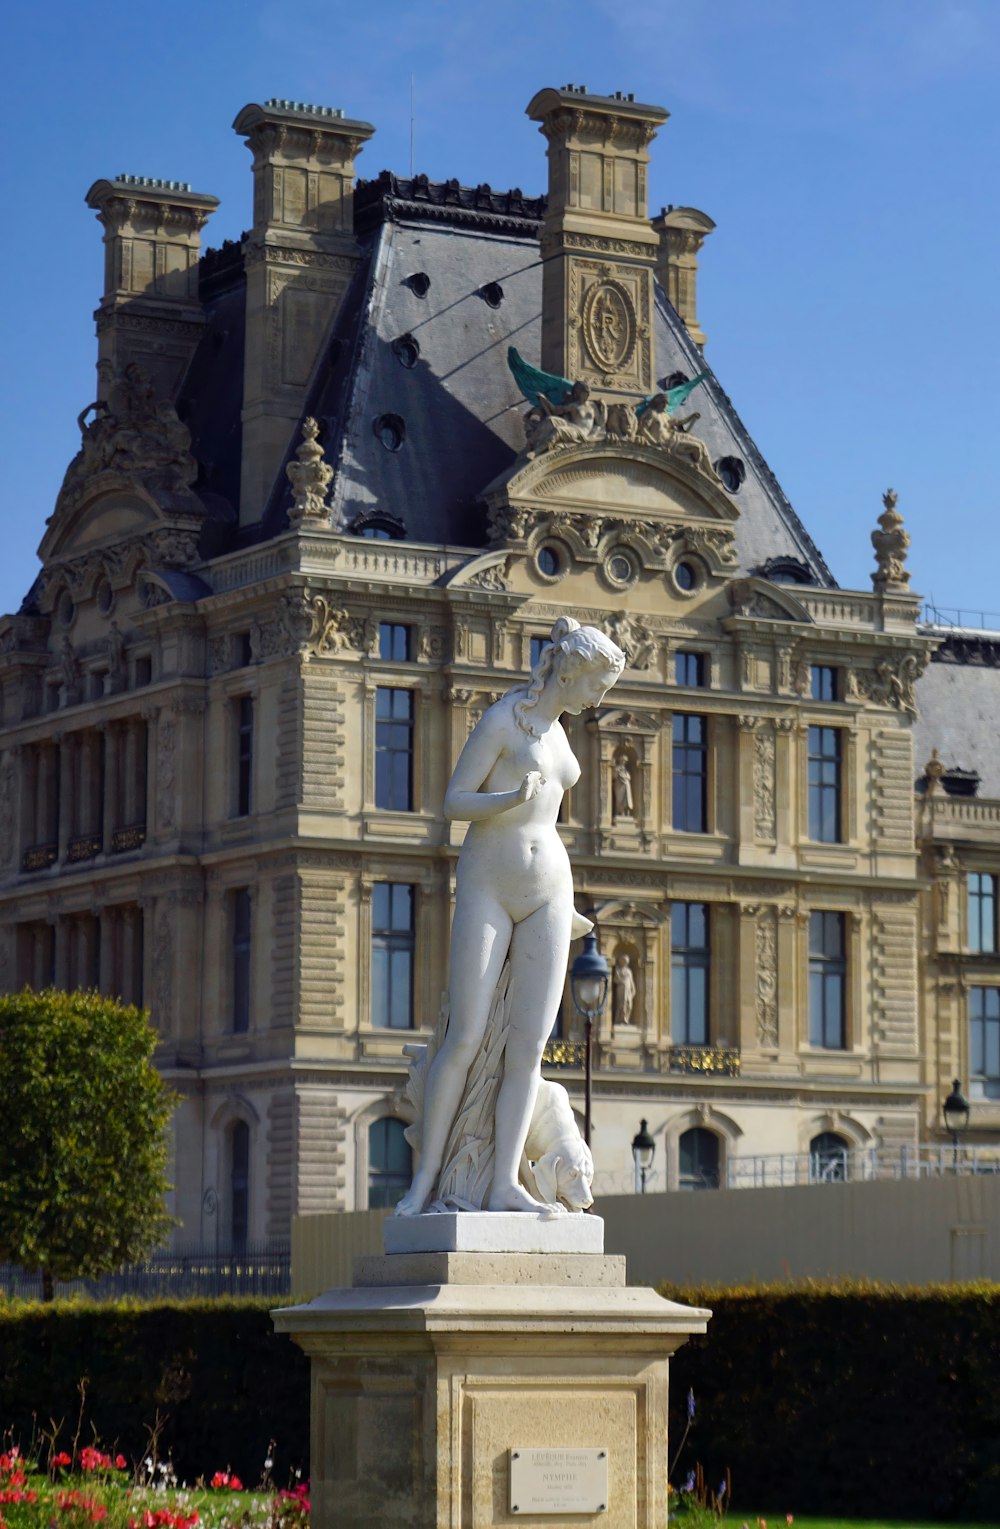 a statue in front of a large building